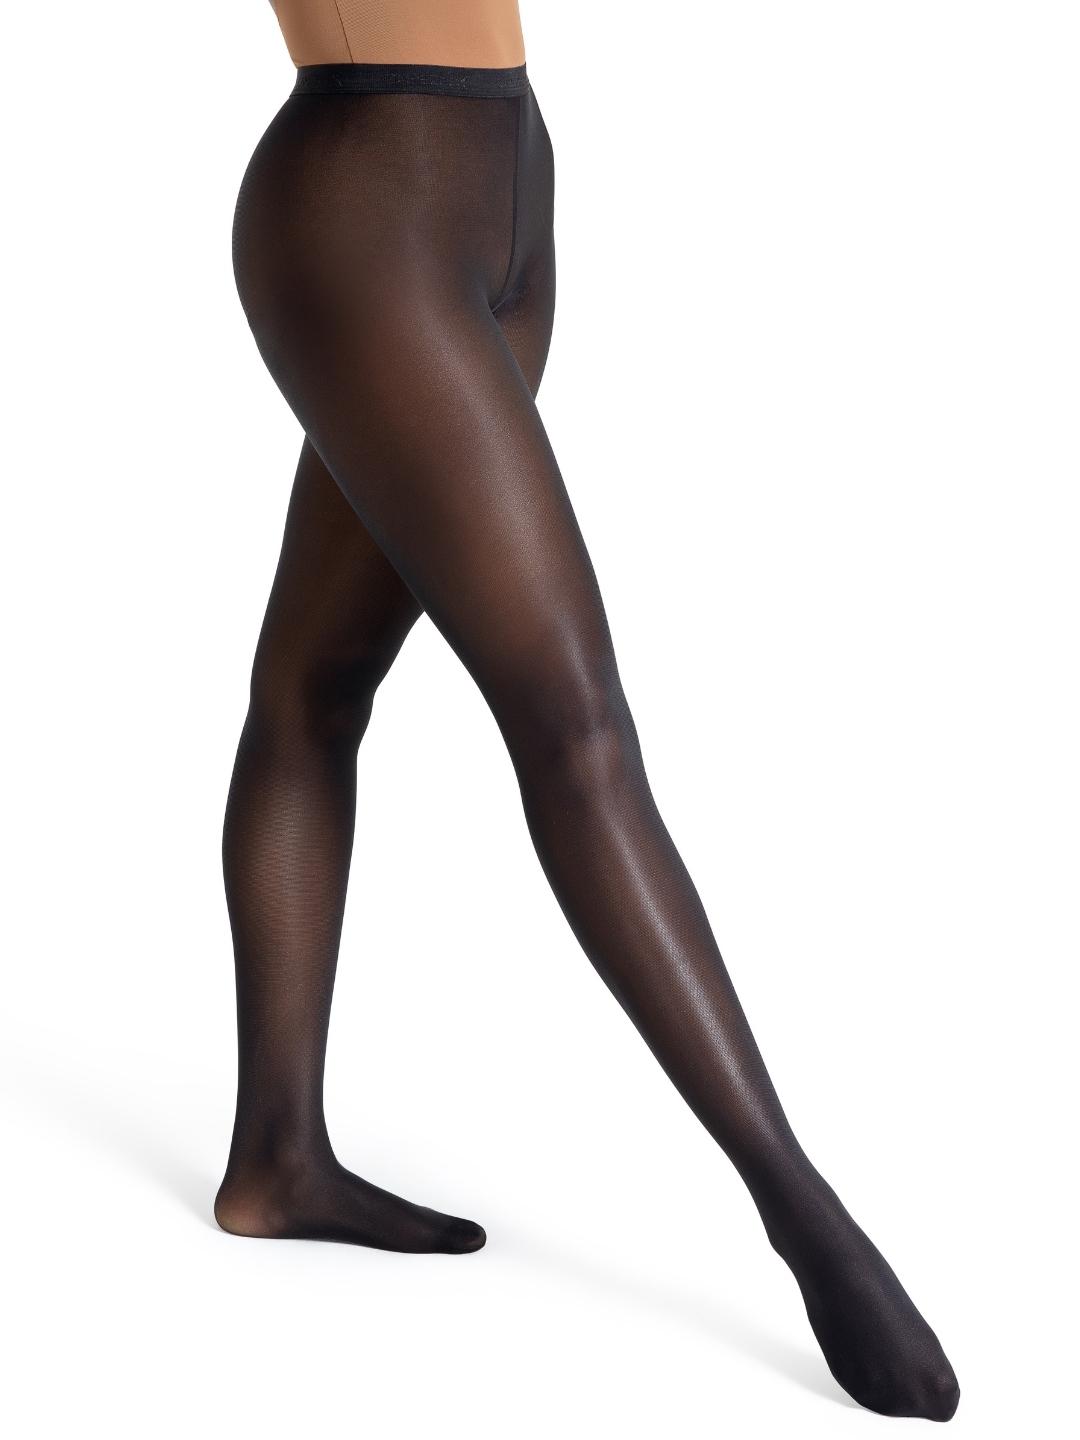 Ultra Shimmery tights